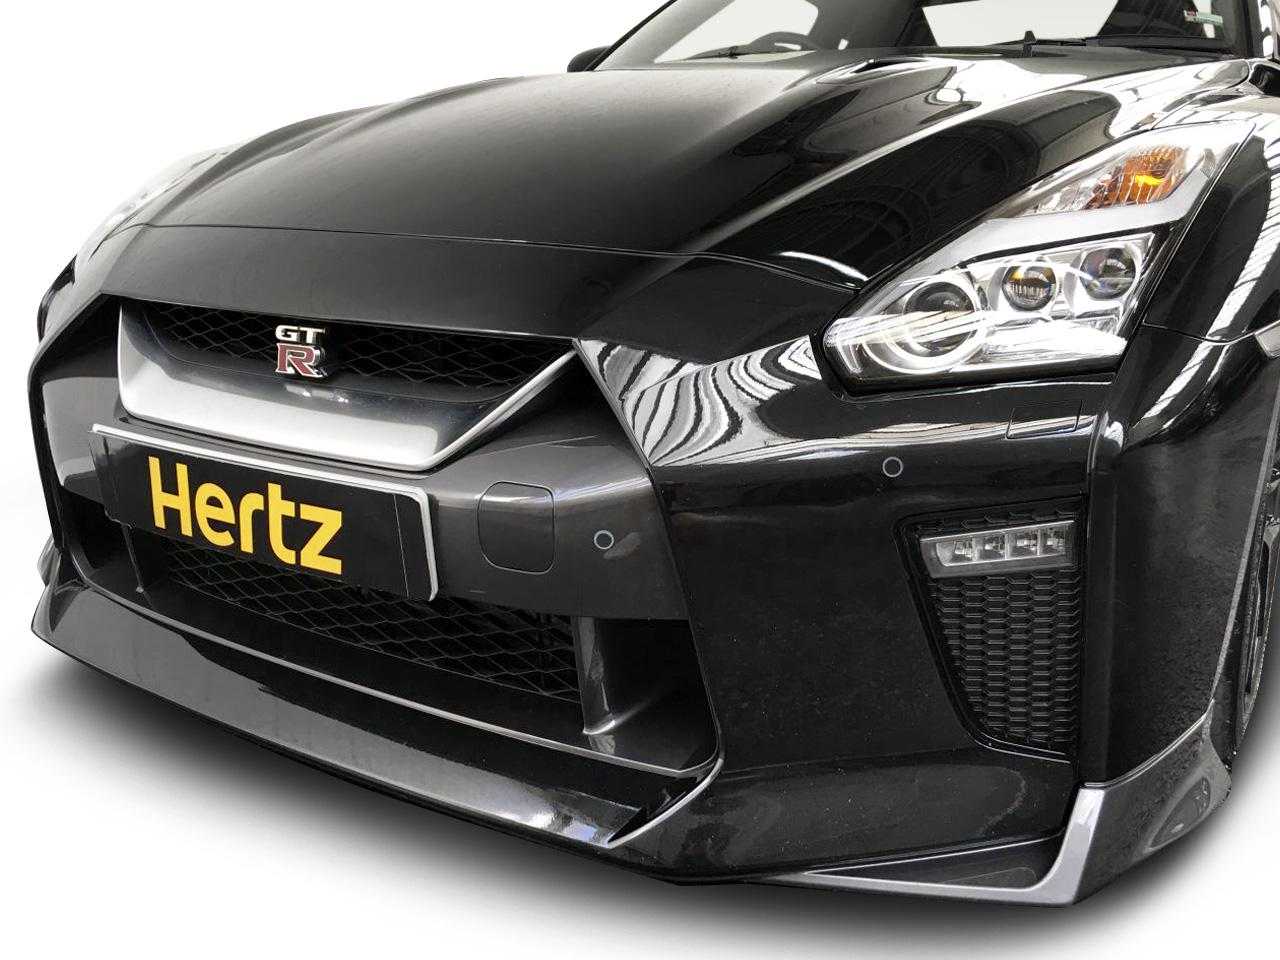 Drive Nissan GT-R Car for hire